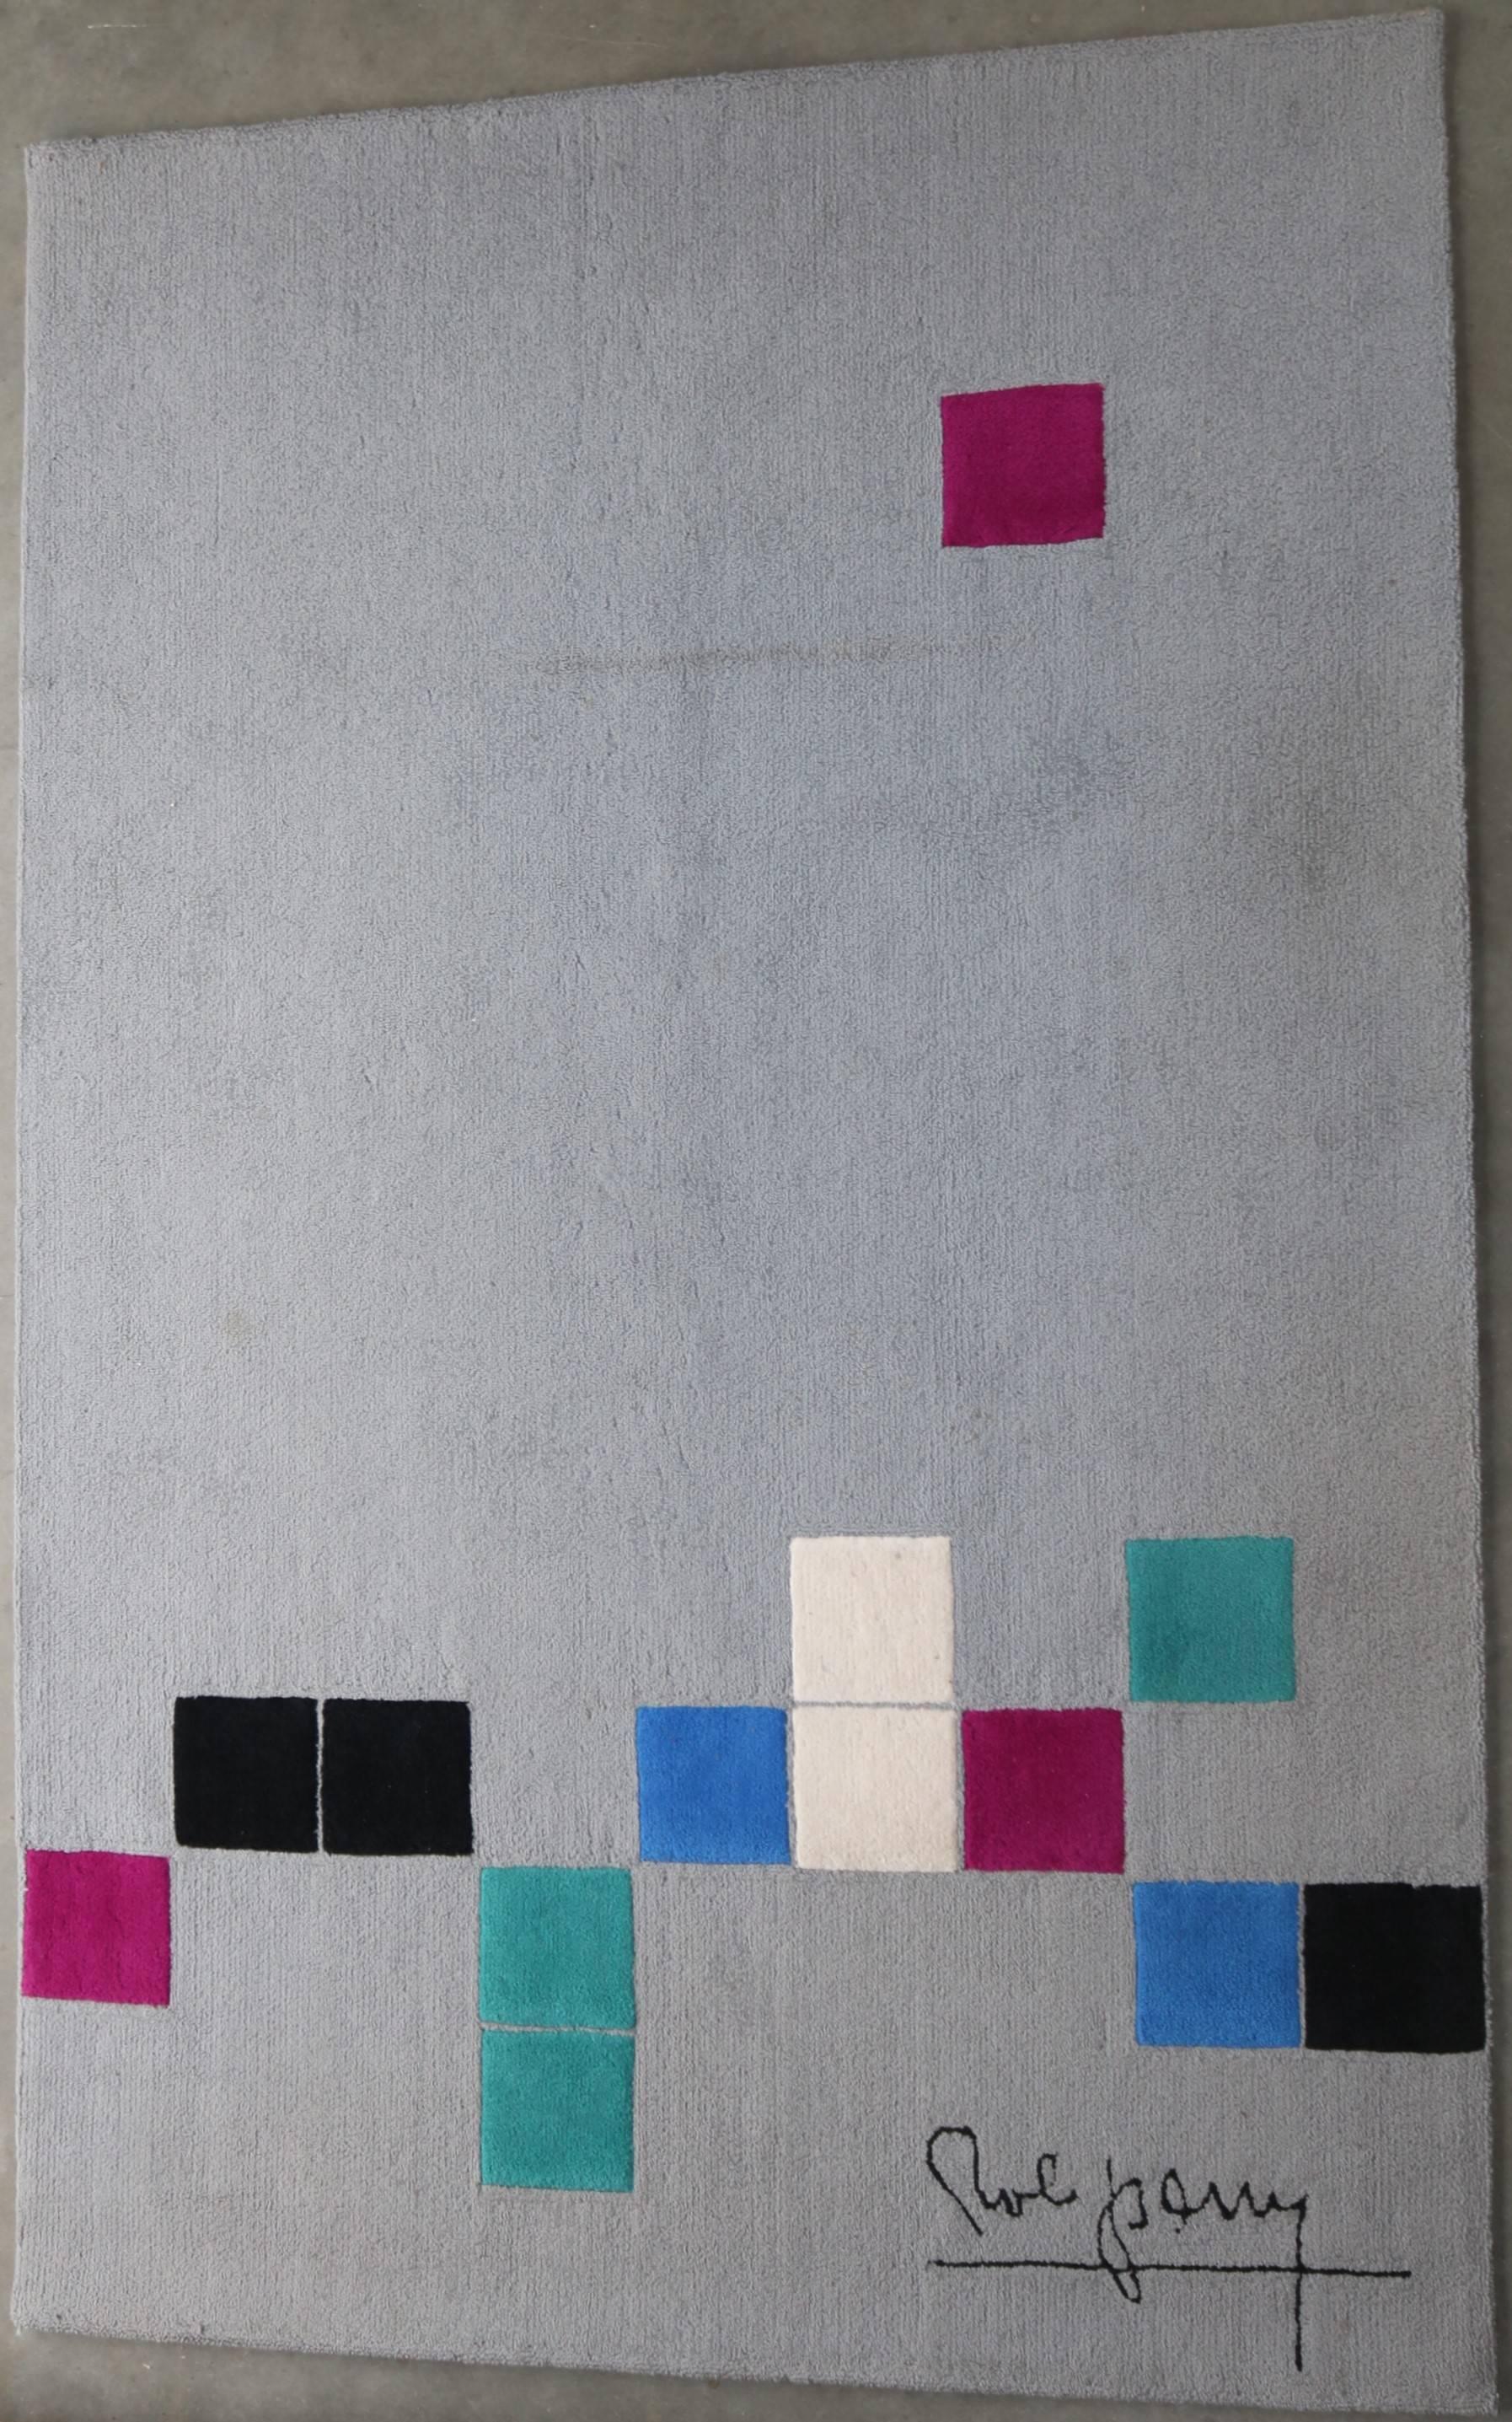 A beautiful Minimalist rug designed by Rob Parry, manufactured by Danish Carpets in The Netherlands, circa 2000. This model is named 